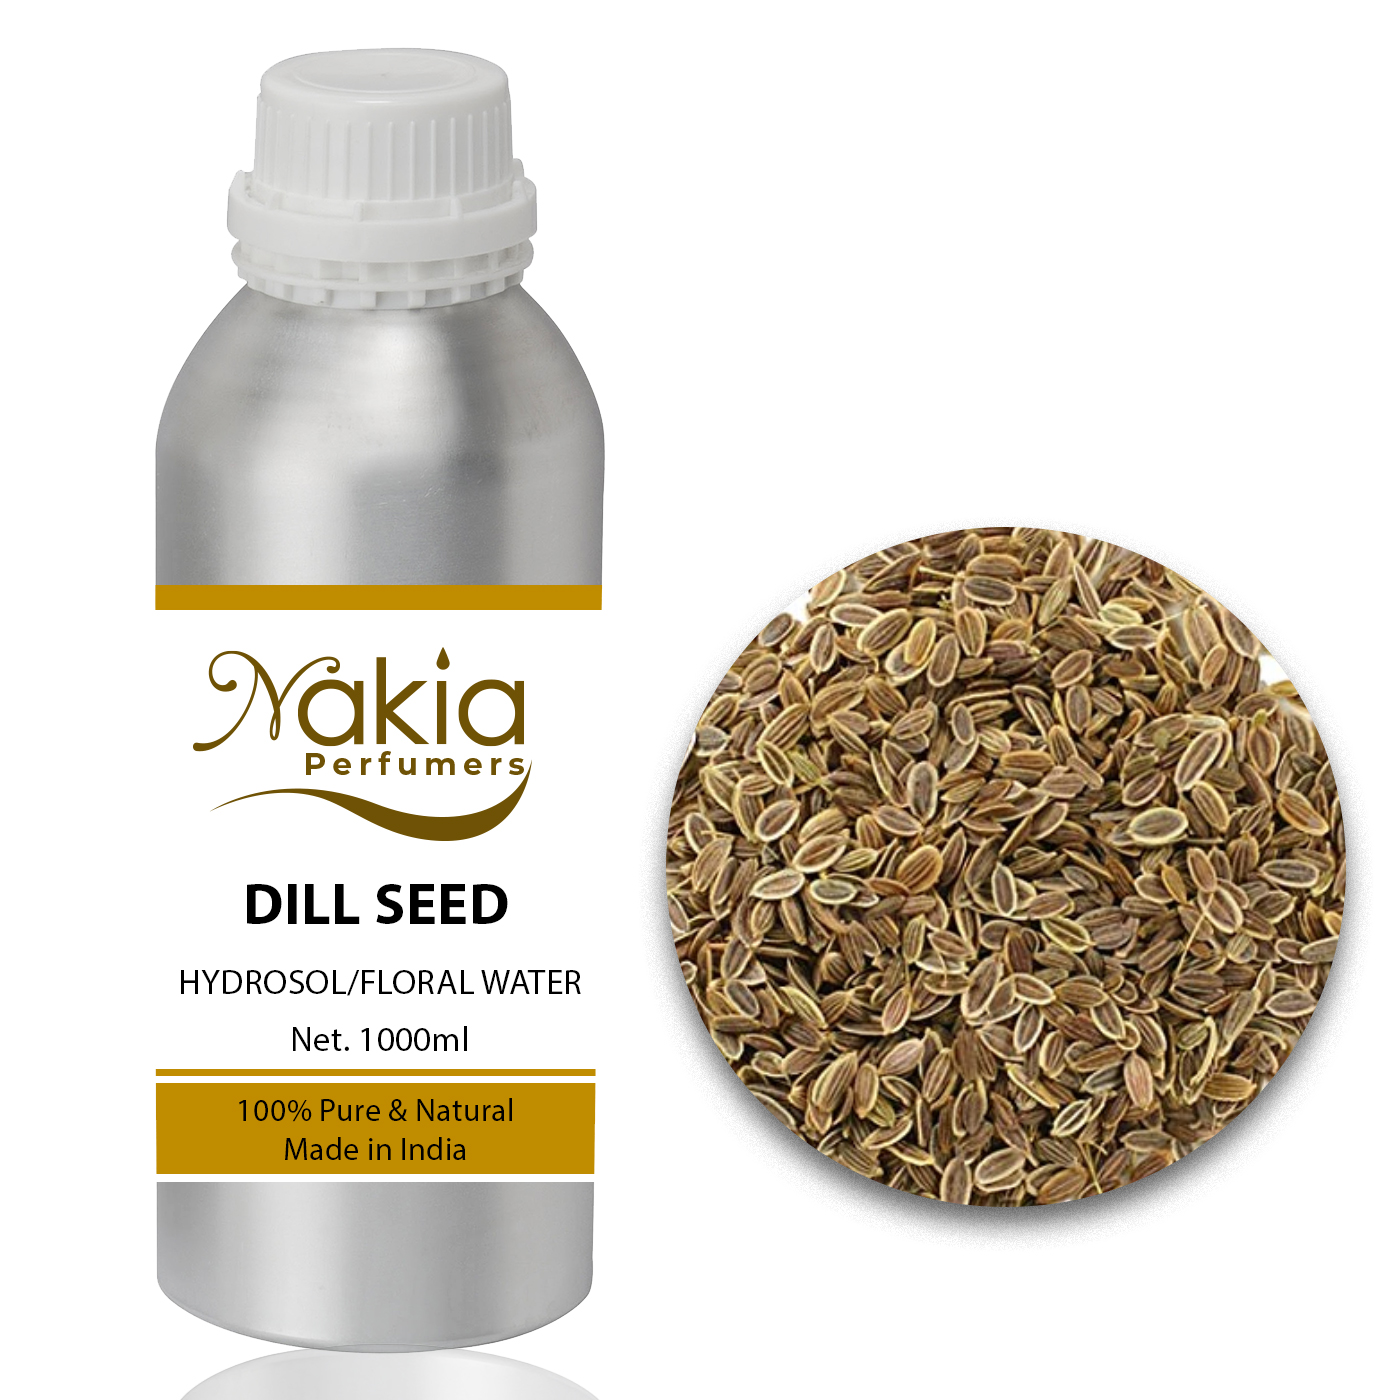 DILL-SEED FLORAL WATER/HYDROSOL